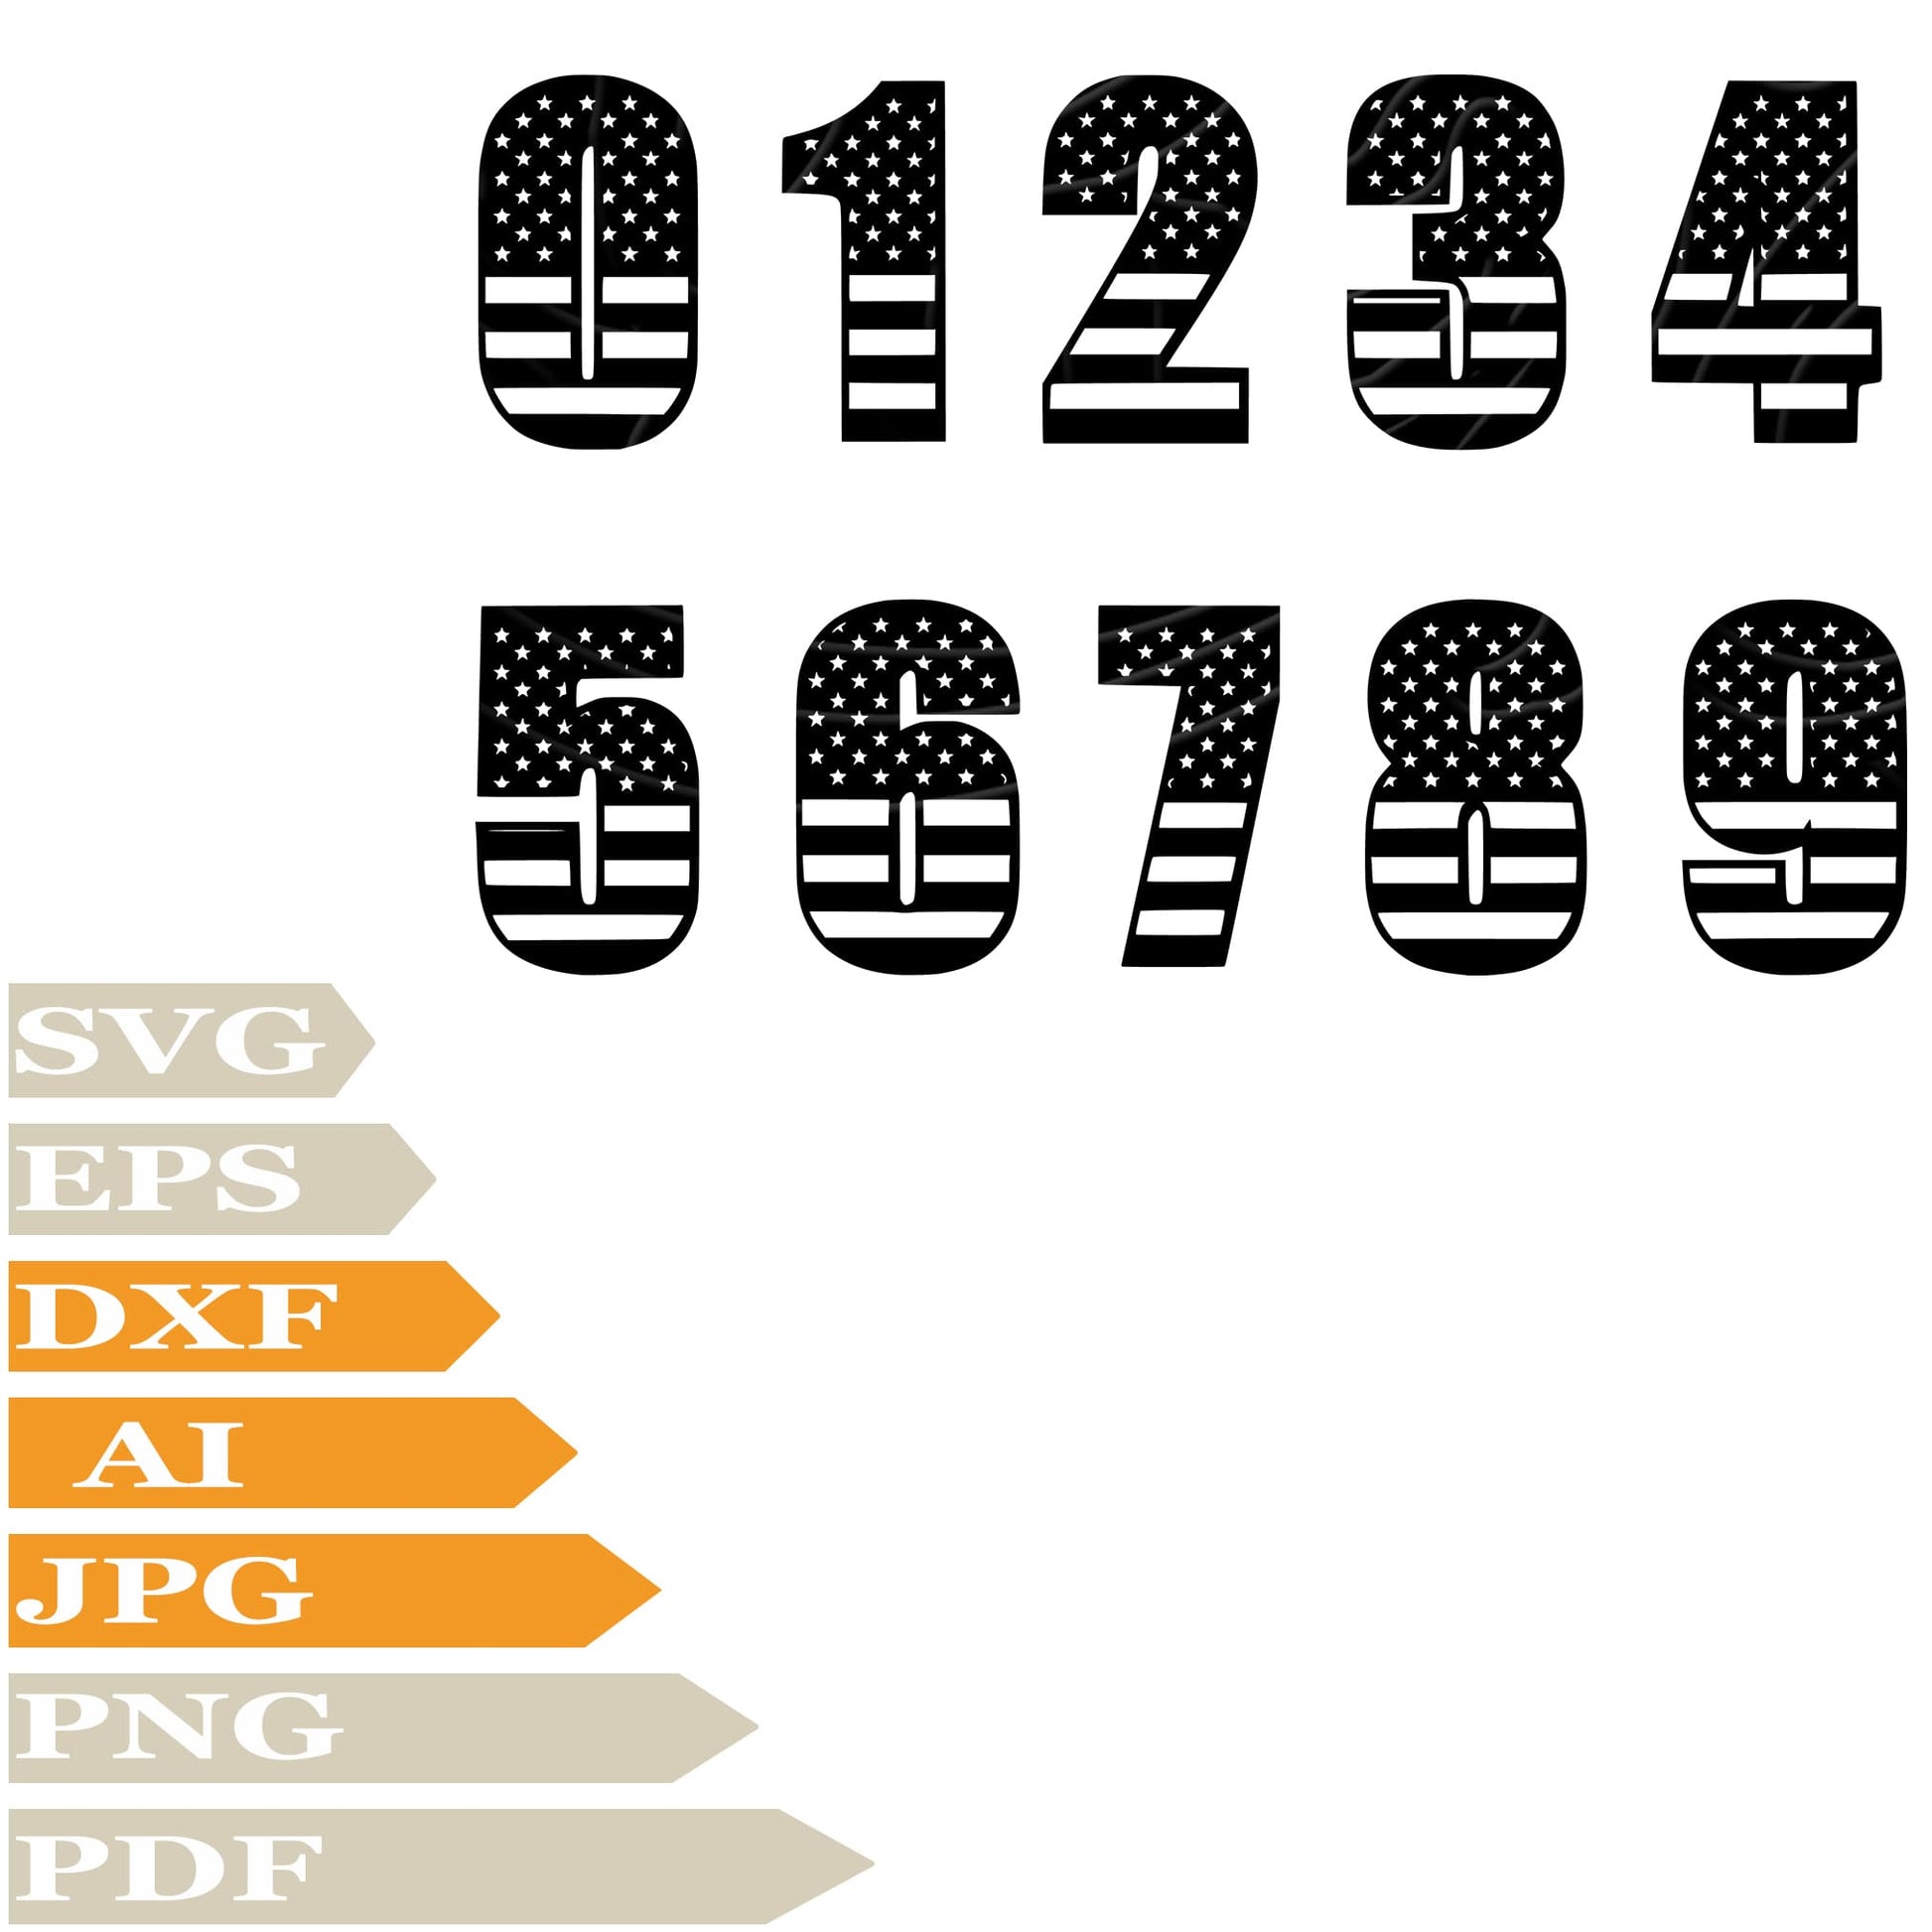 Аlphabet SVG, Numbers SVG Design, Numbers Аlphabet Usa Flag Vector Graphics, Usa Flag Аlphabet Digits For Cricut, For Tattoo, Clip Art, Cut File, T-Shirts, Silhouette, All Available